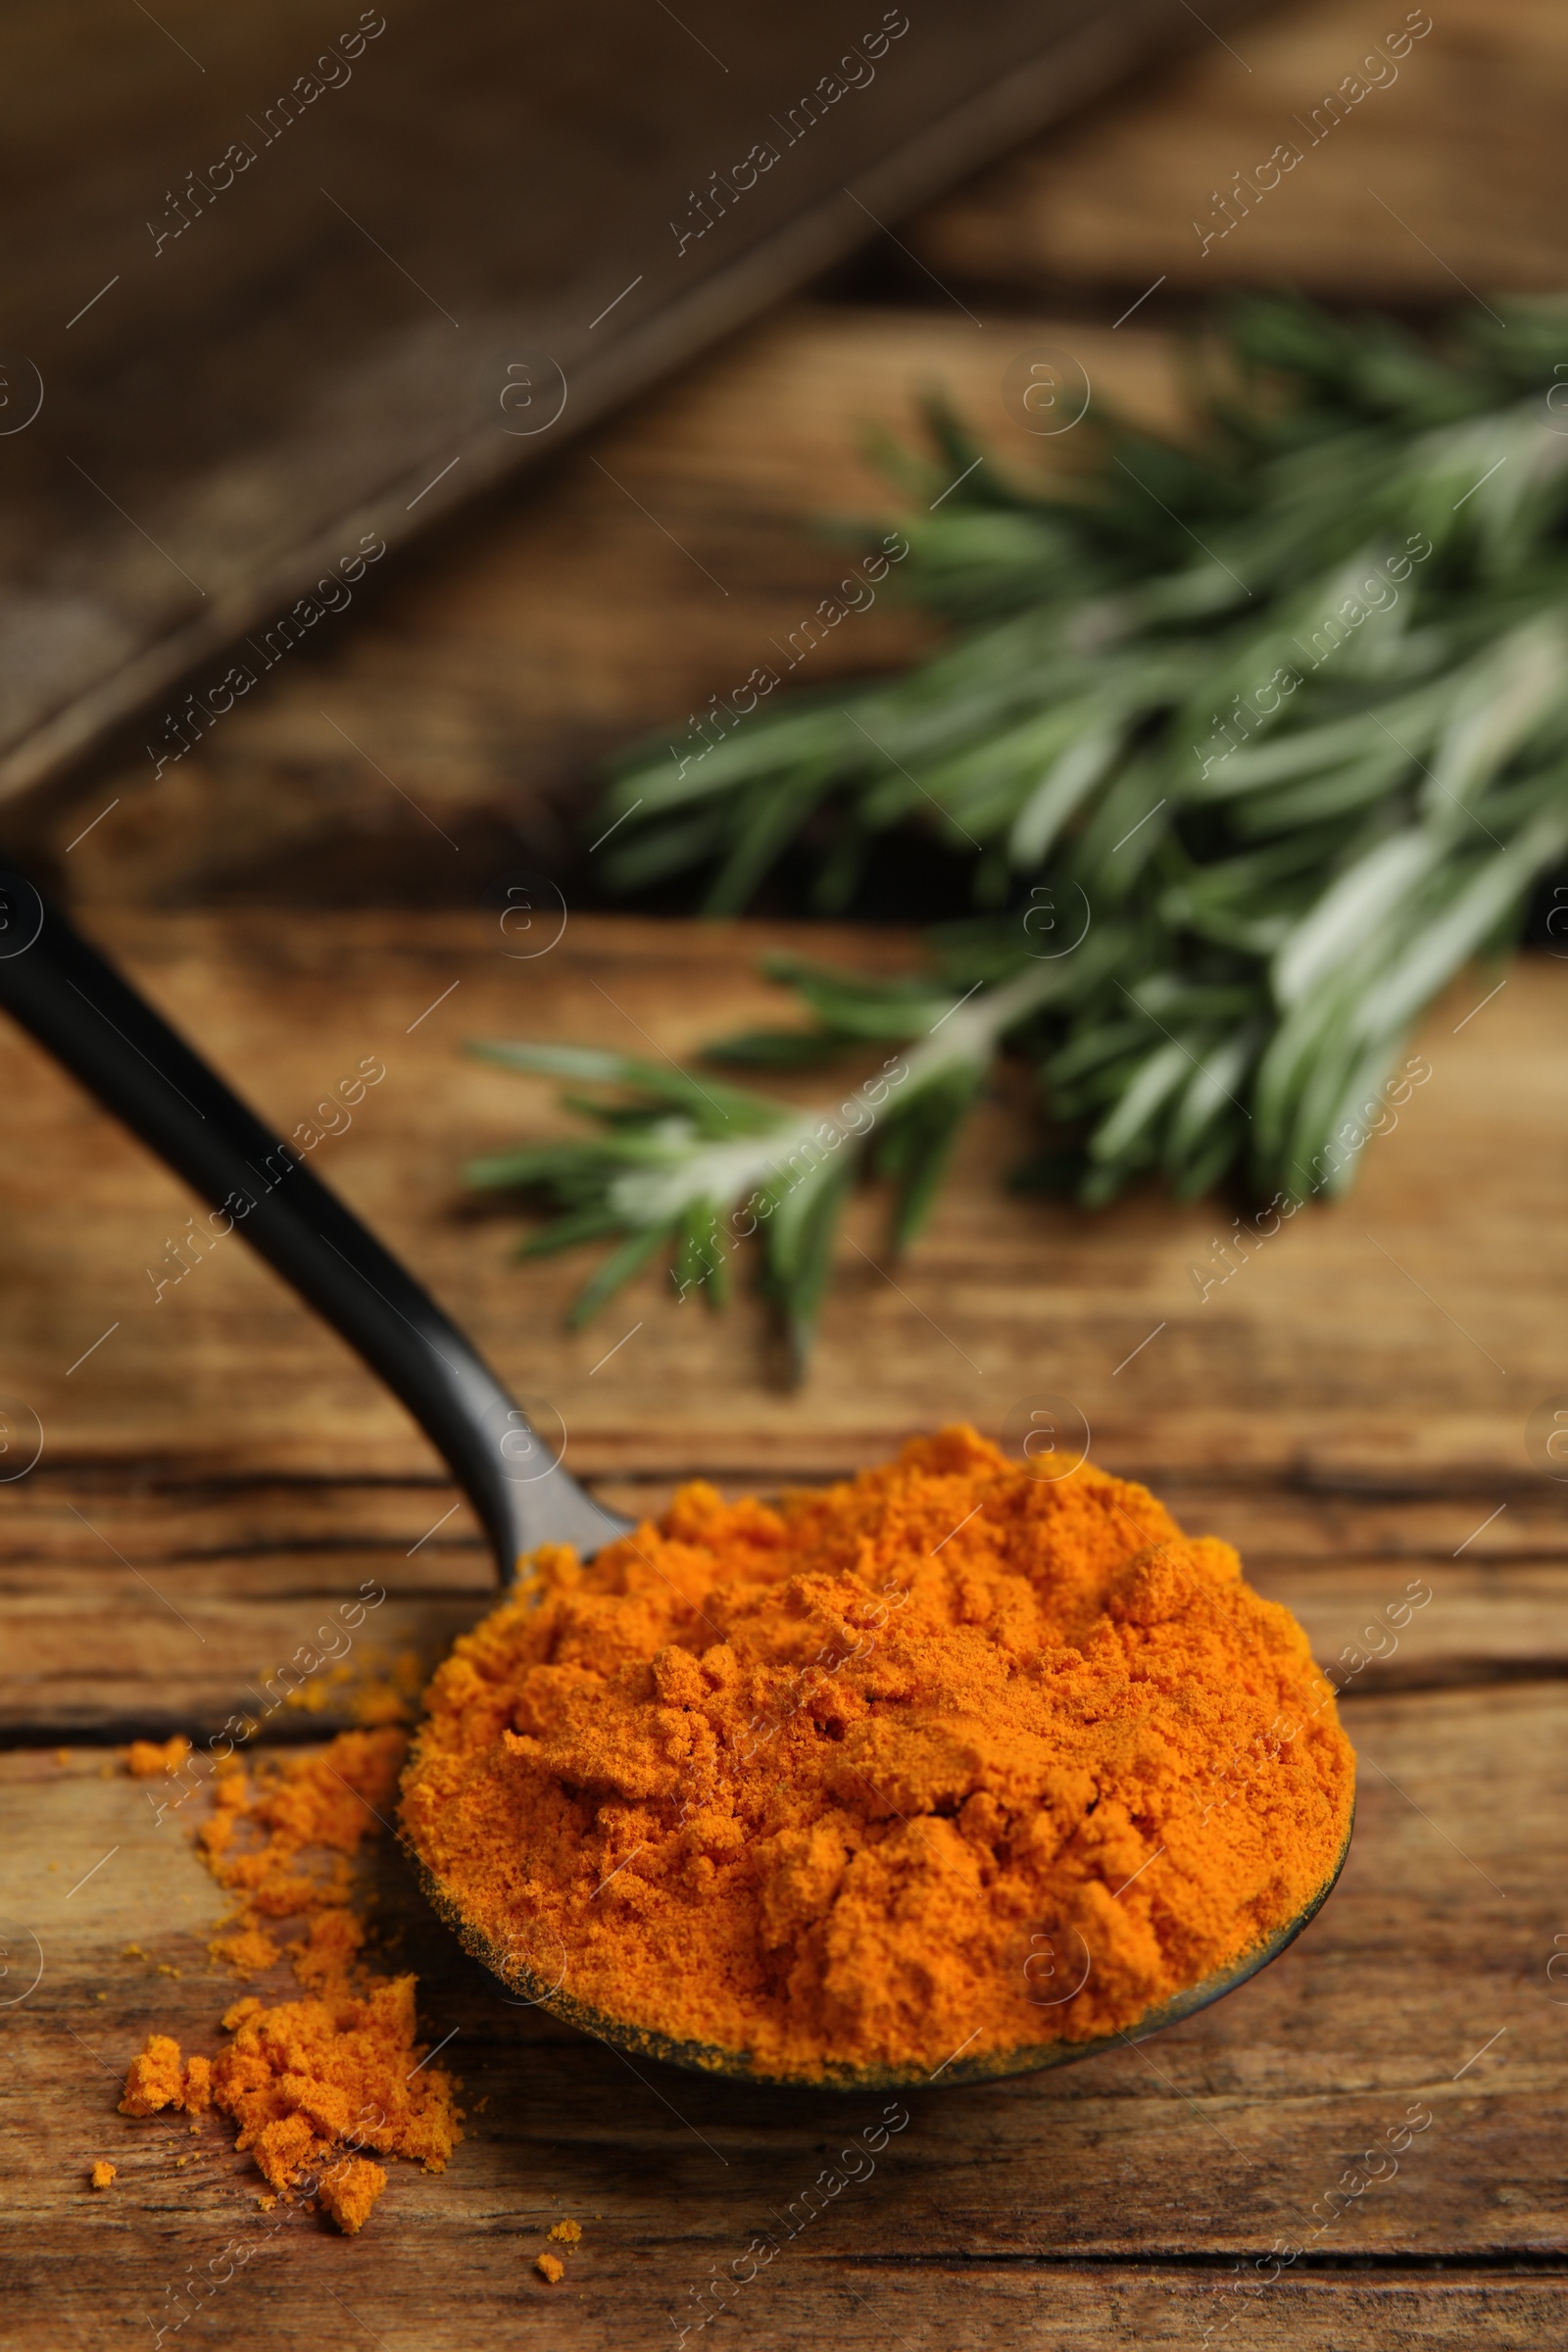 Photo of Spoon with saffron powder and rosemary on wooden table